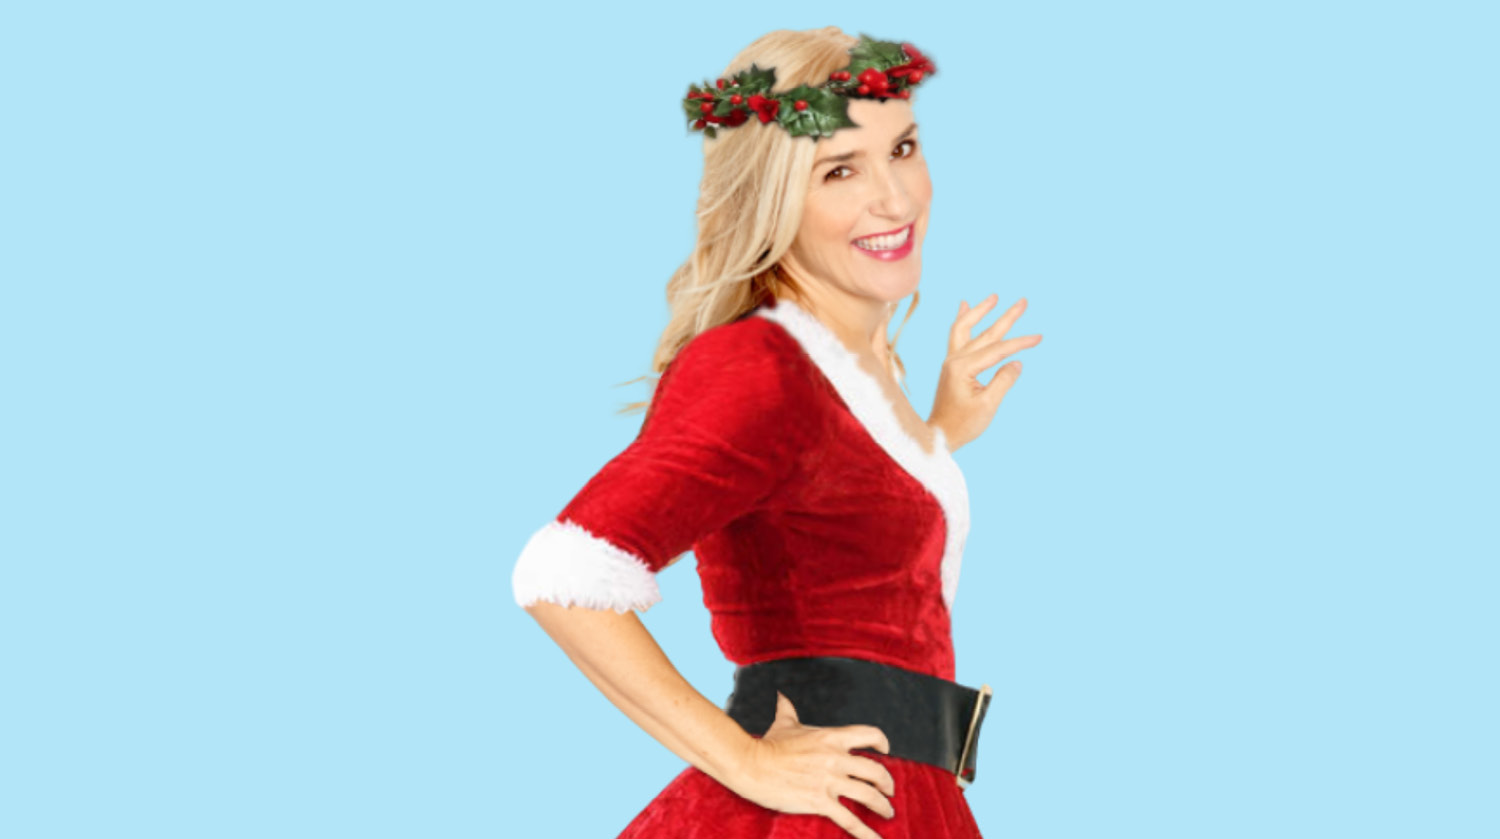 Image of actress and comedian Anne Marie Scheffler smiling and wearing a red velvet Santa-style dress with white fluffy trim, along with a holly and ivy crown. She has light skin and blonde hair. The background is light blue.    